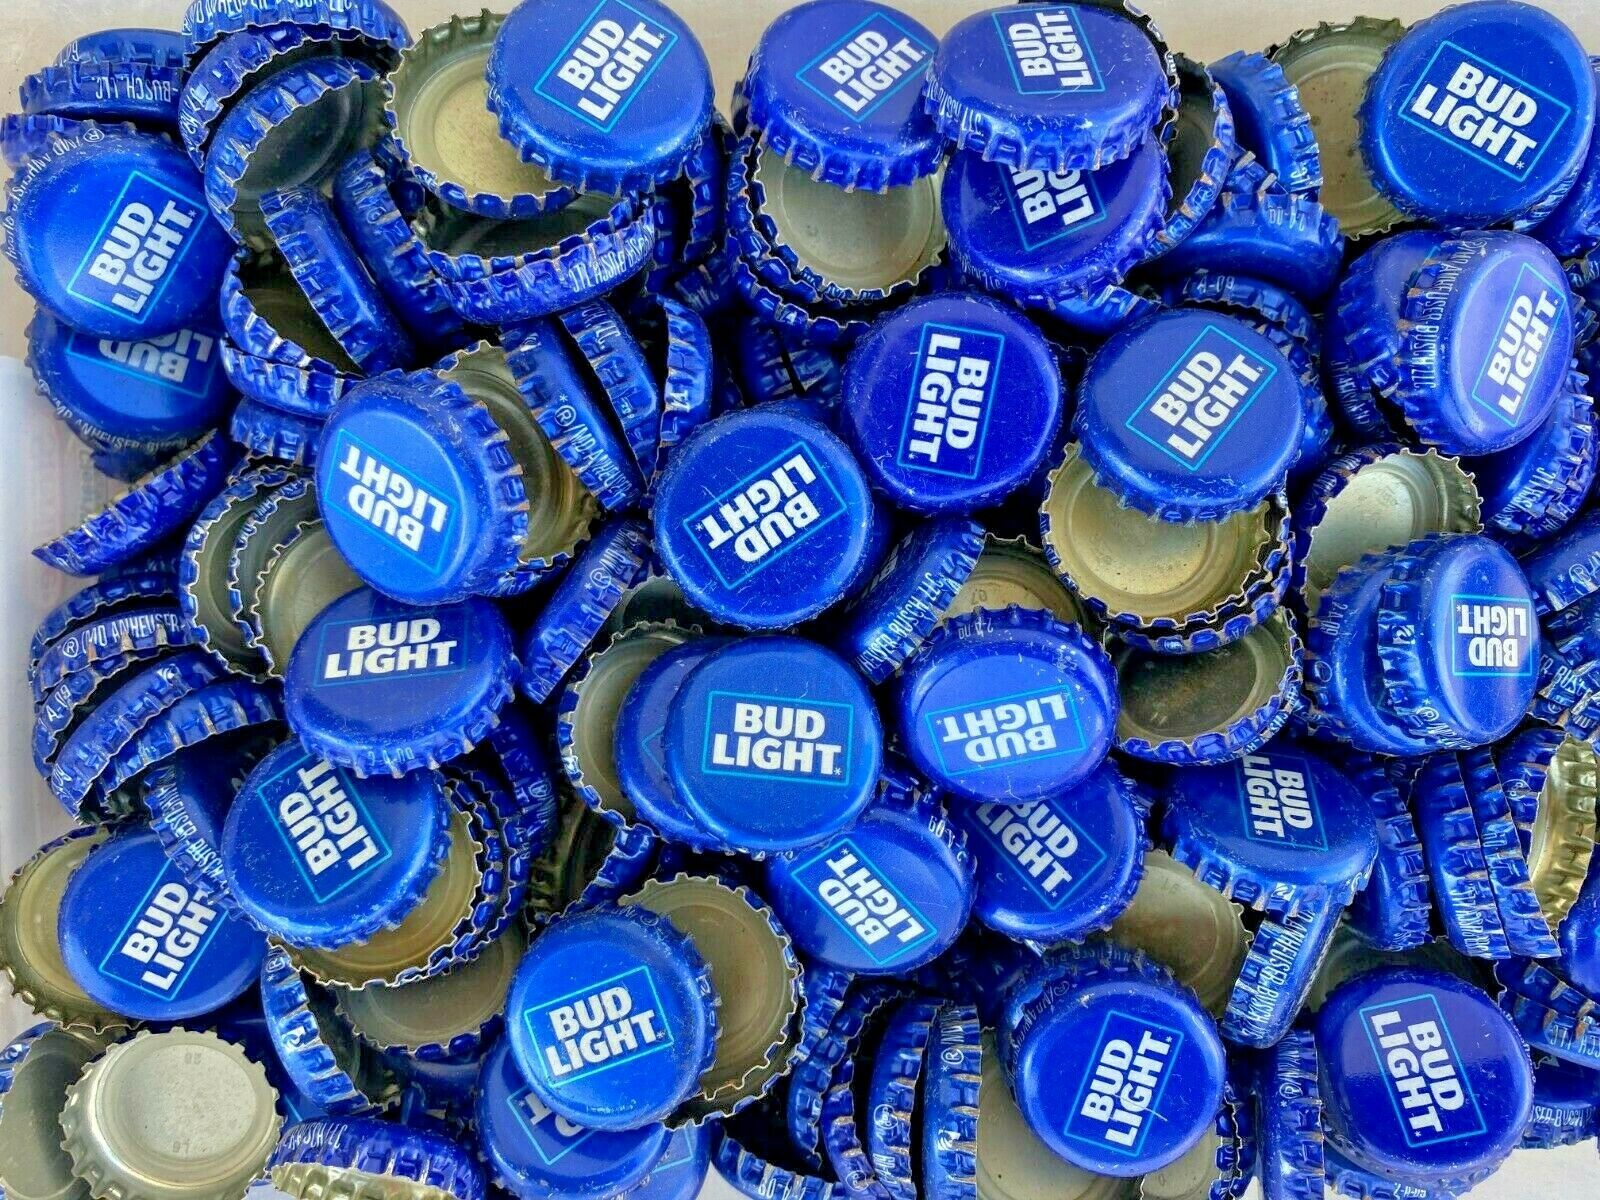 100 ((bud Light)) No Dents Beer Bottle Caps Free Shipping